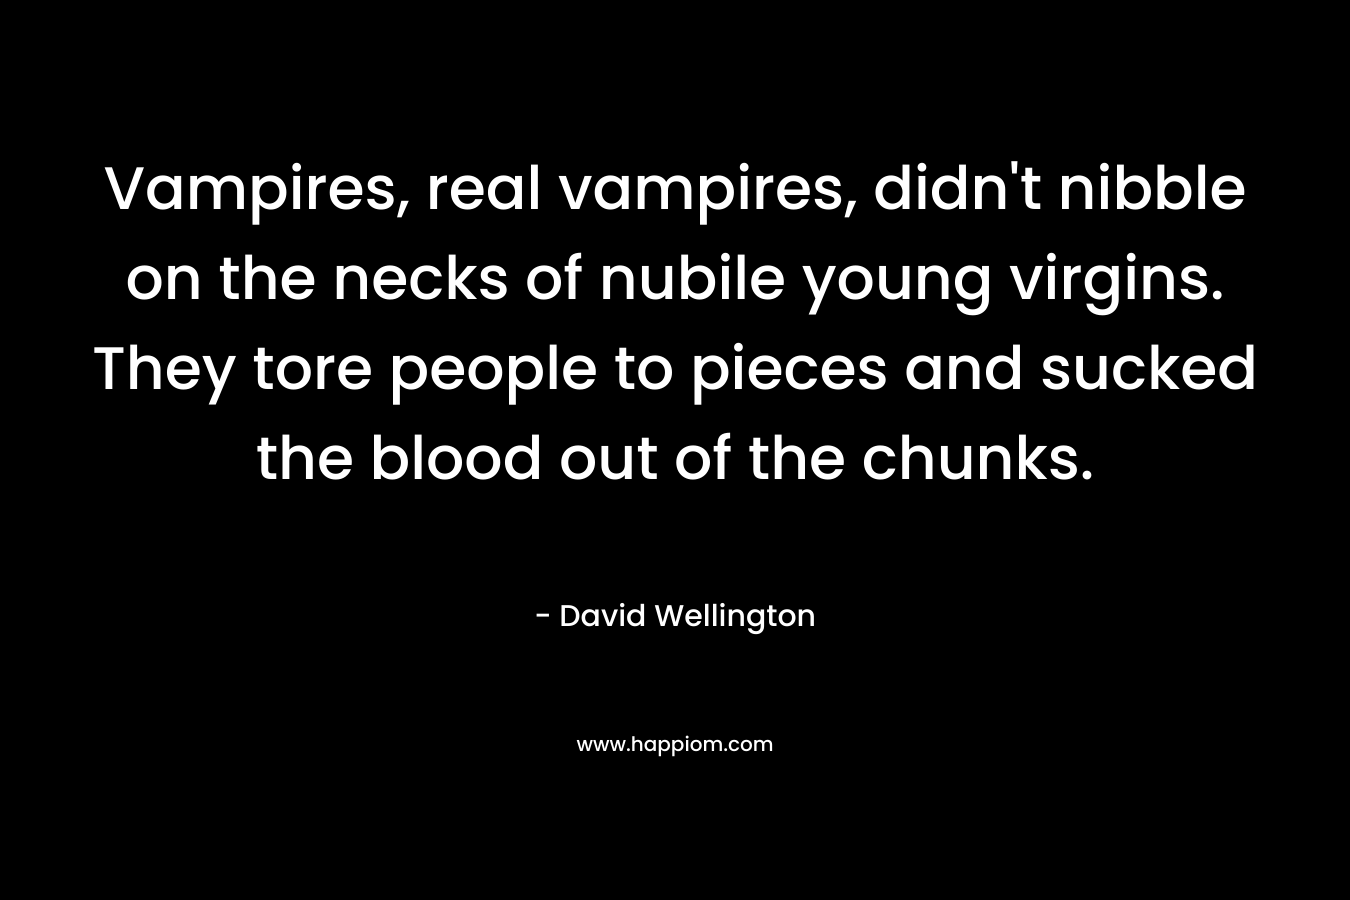 Vampires, real vampires, didn’t nibble on the necks of nubile young virgins. They tore people to pieces and sucked the blood out of the chunks.  – David Wellington